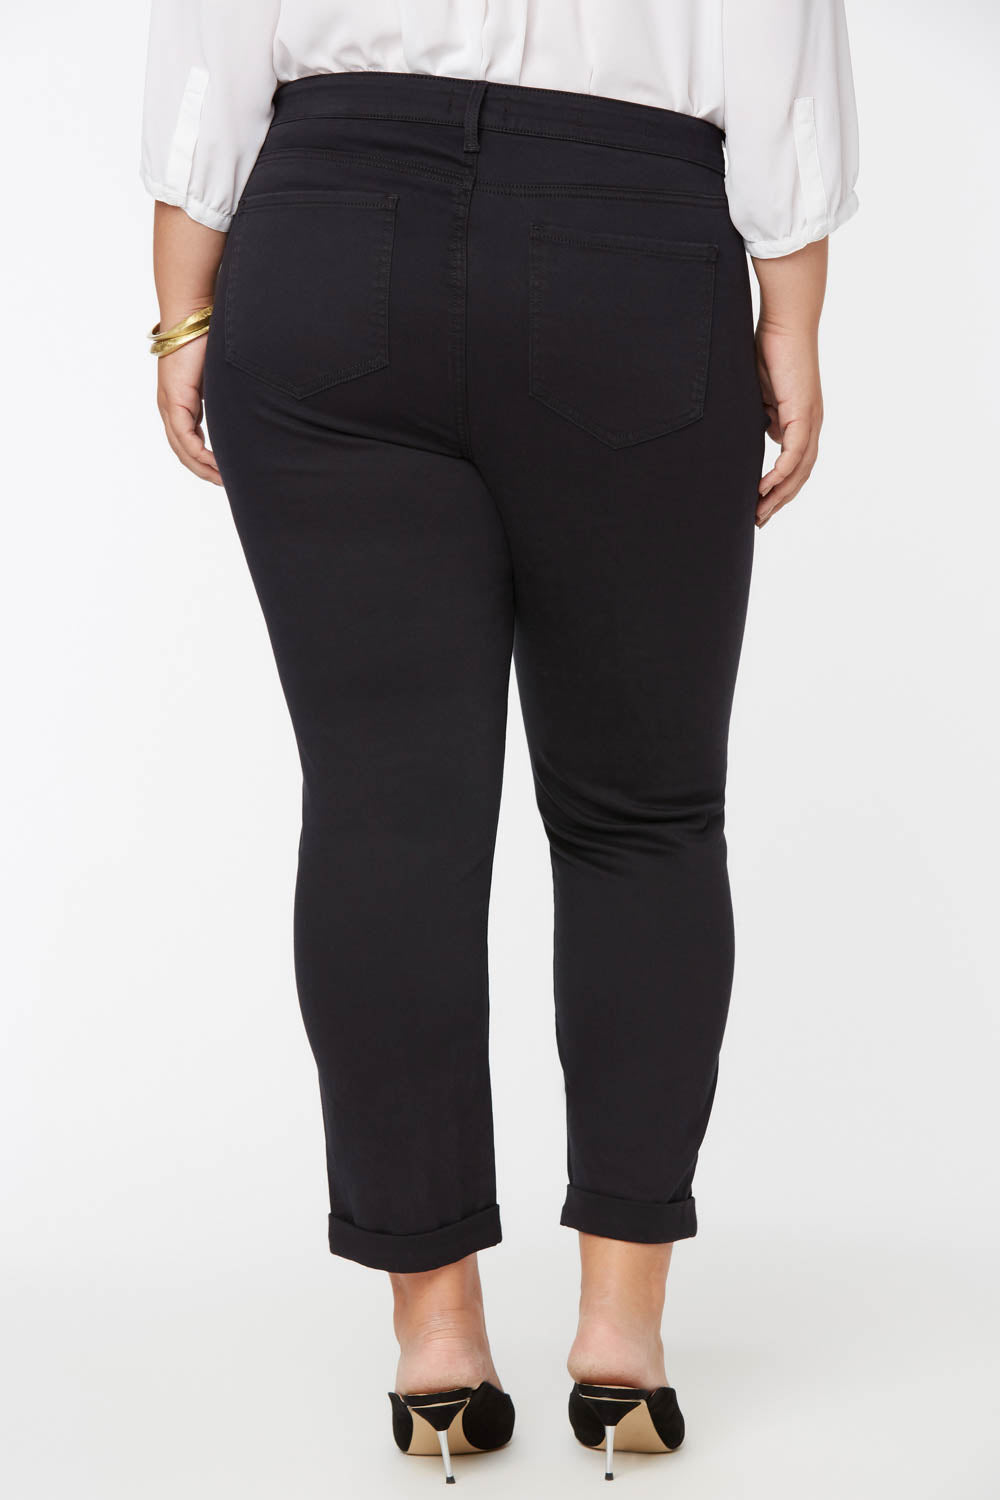 NYDJ Sheri Slim Ankle Jeans In Plus Size With Roll Cuffs - Black